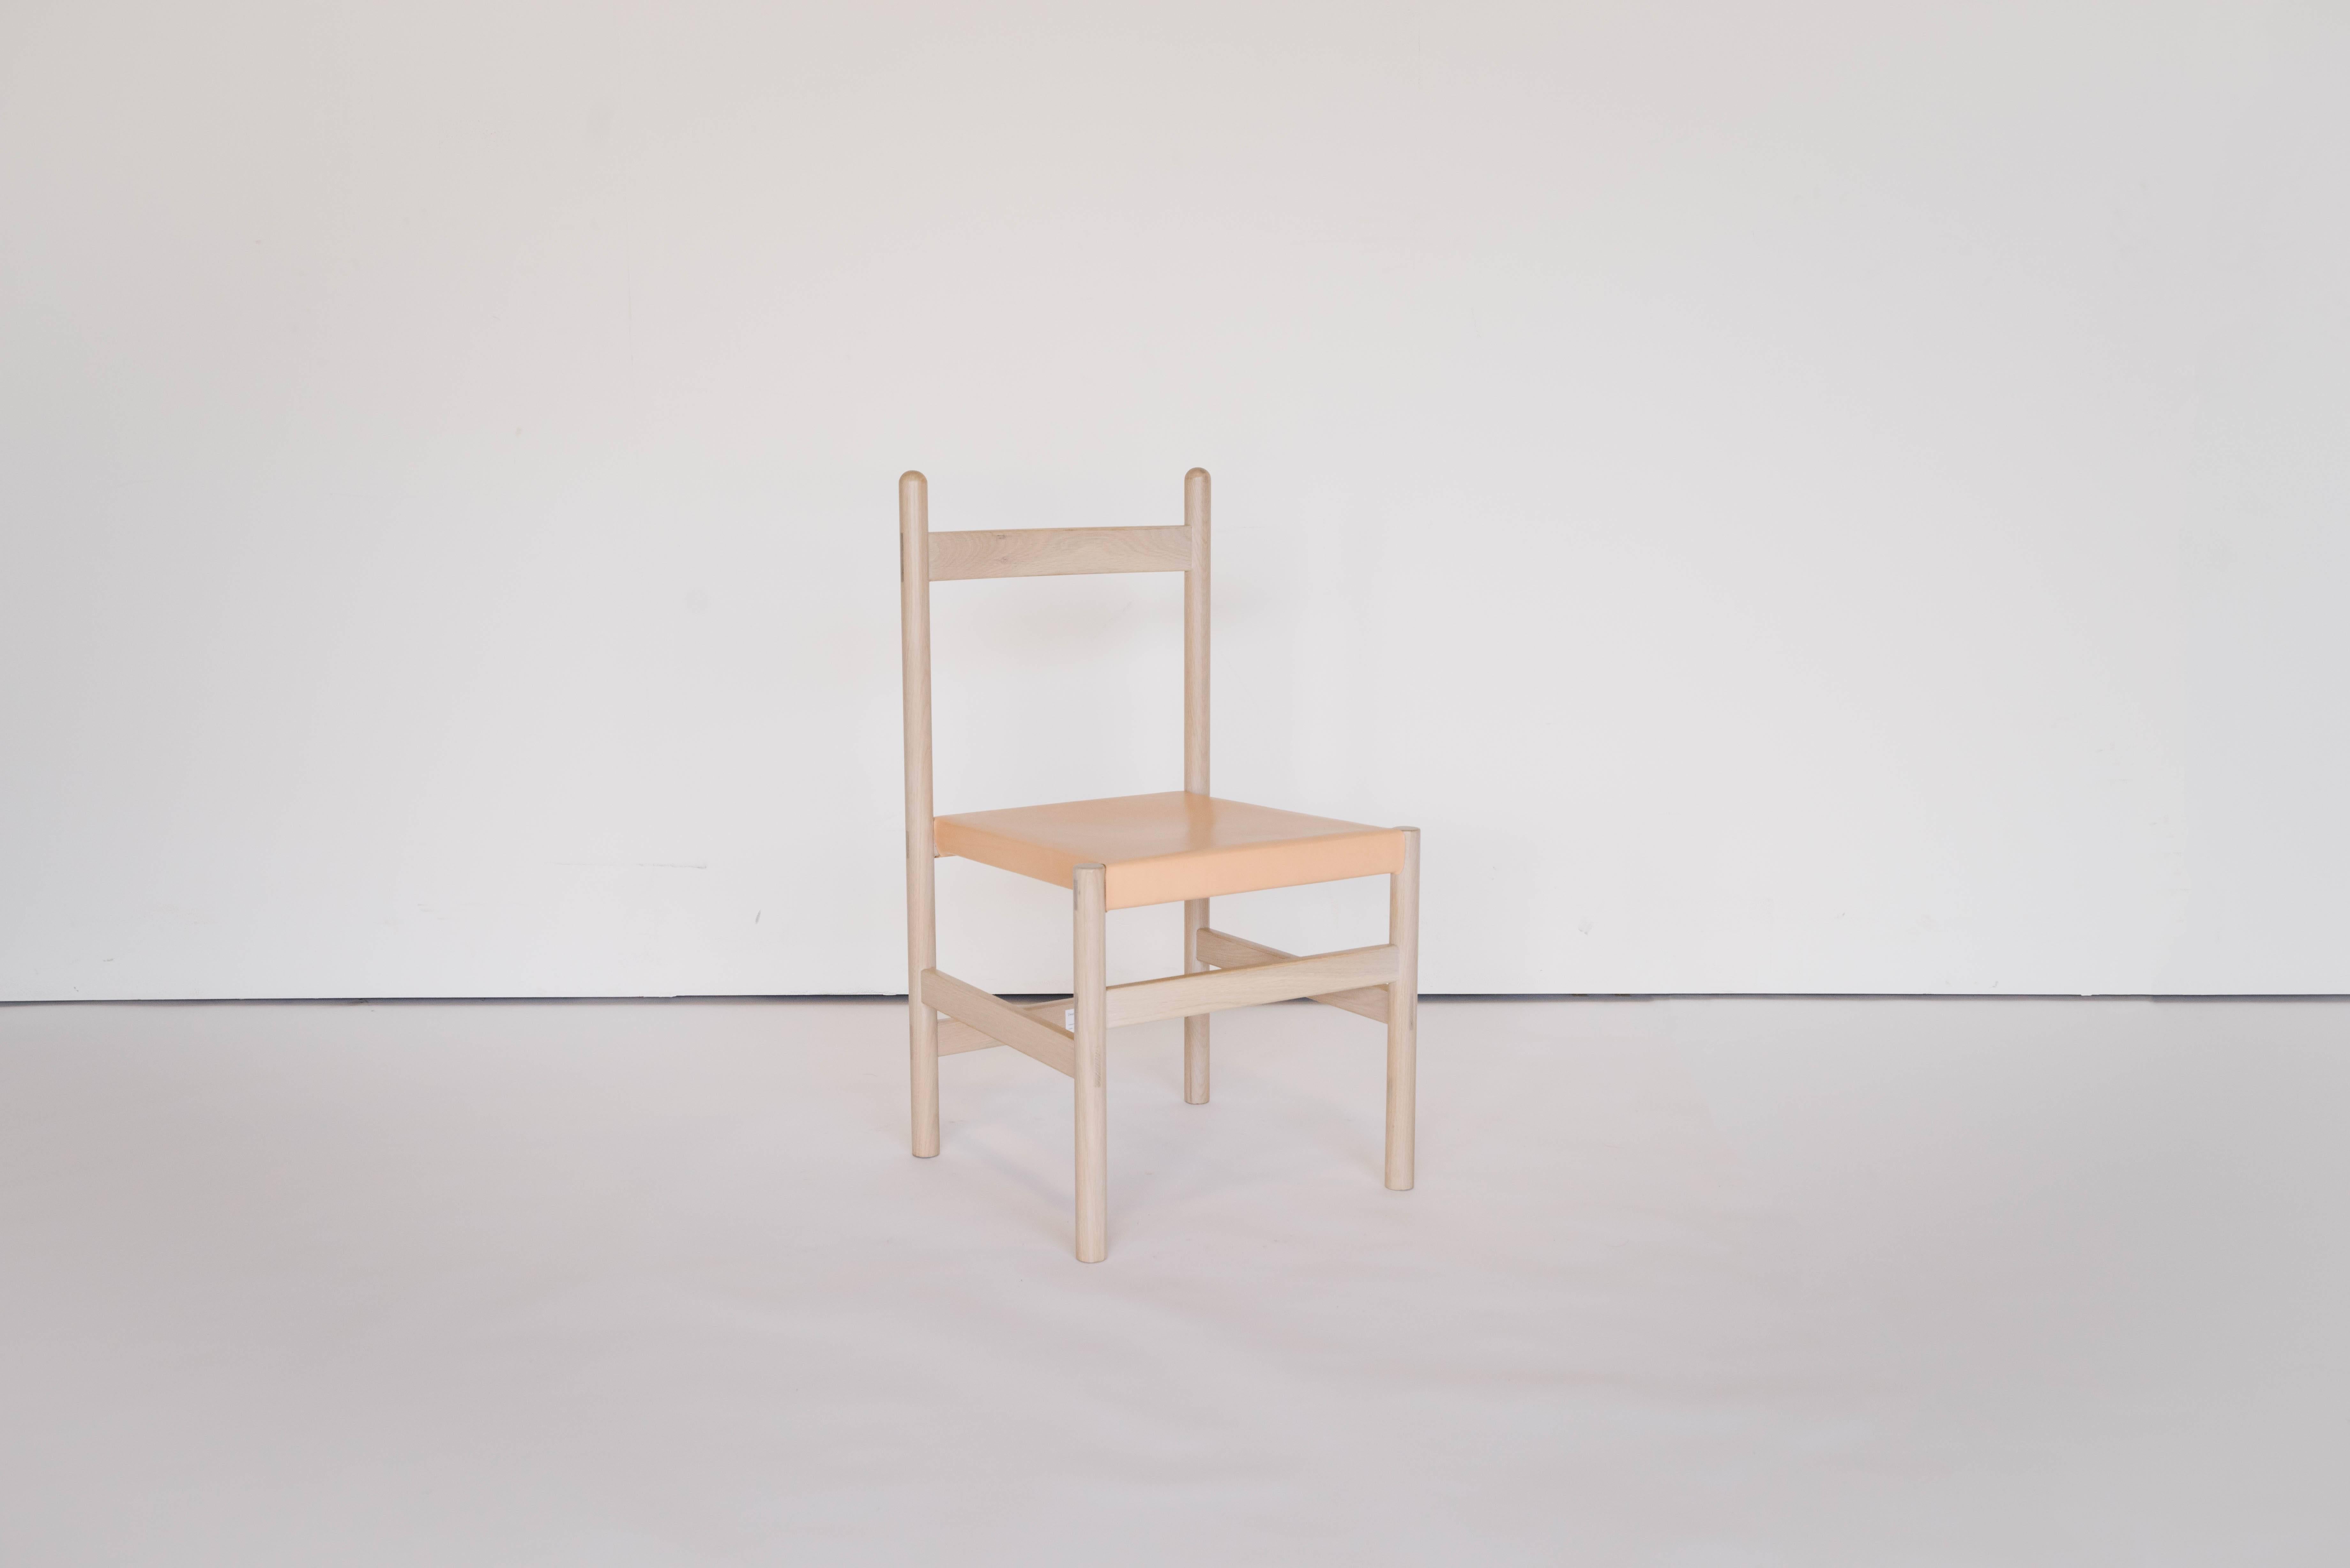 Sun at Six is a contemporary furniture design studio that works with traditional Chinese joinery masters to handcraft our pieces using traditional joinery. A simple Classic, inspired by traditional Shaker style. Clean, straightforward, and